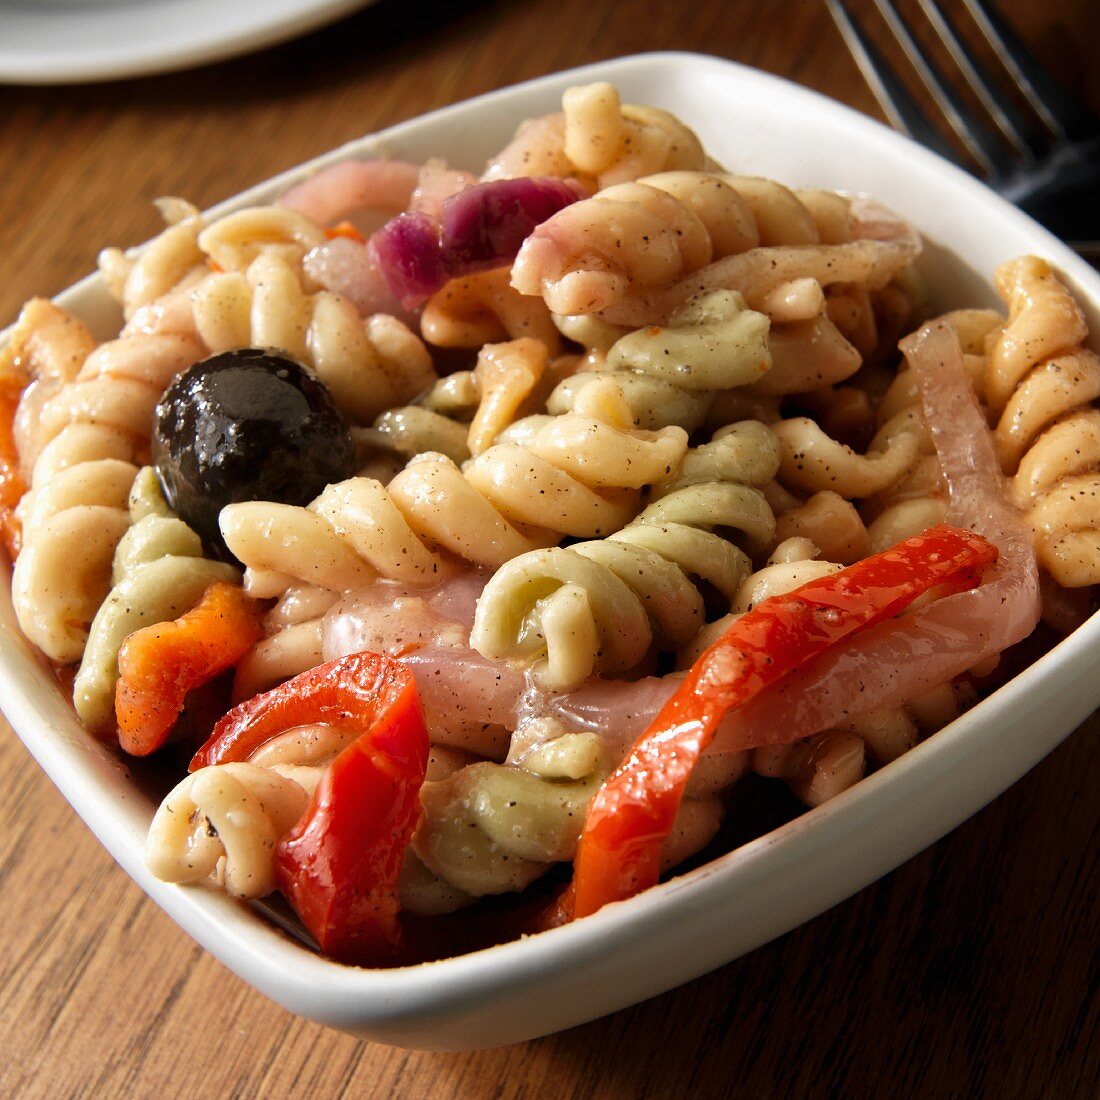 Rotini Pasta salad with olives, peppers, onions